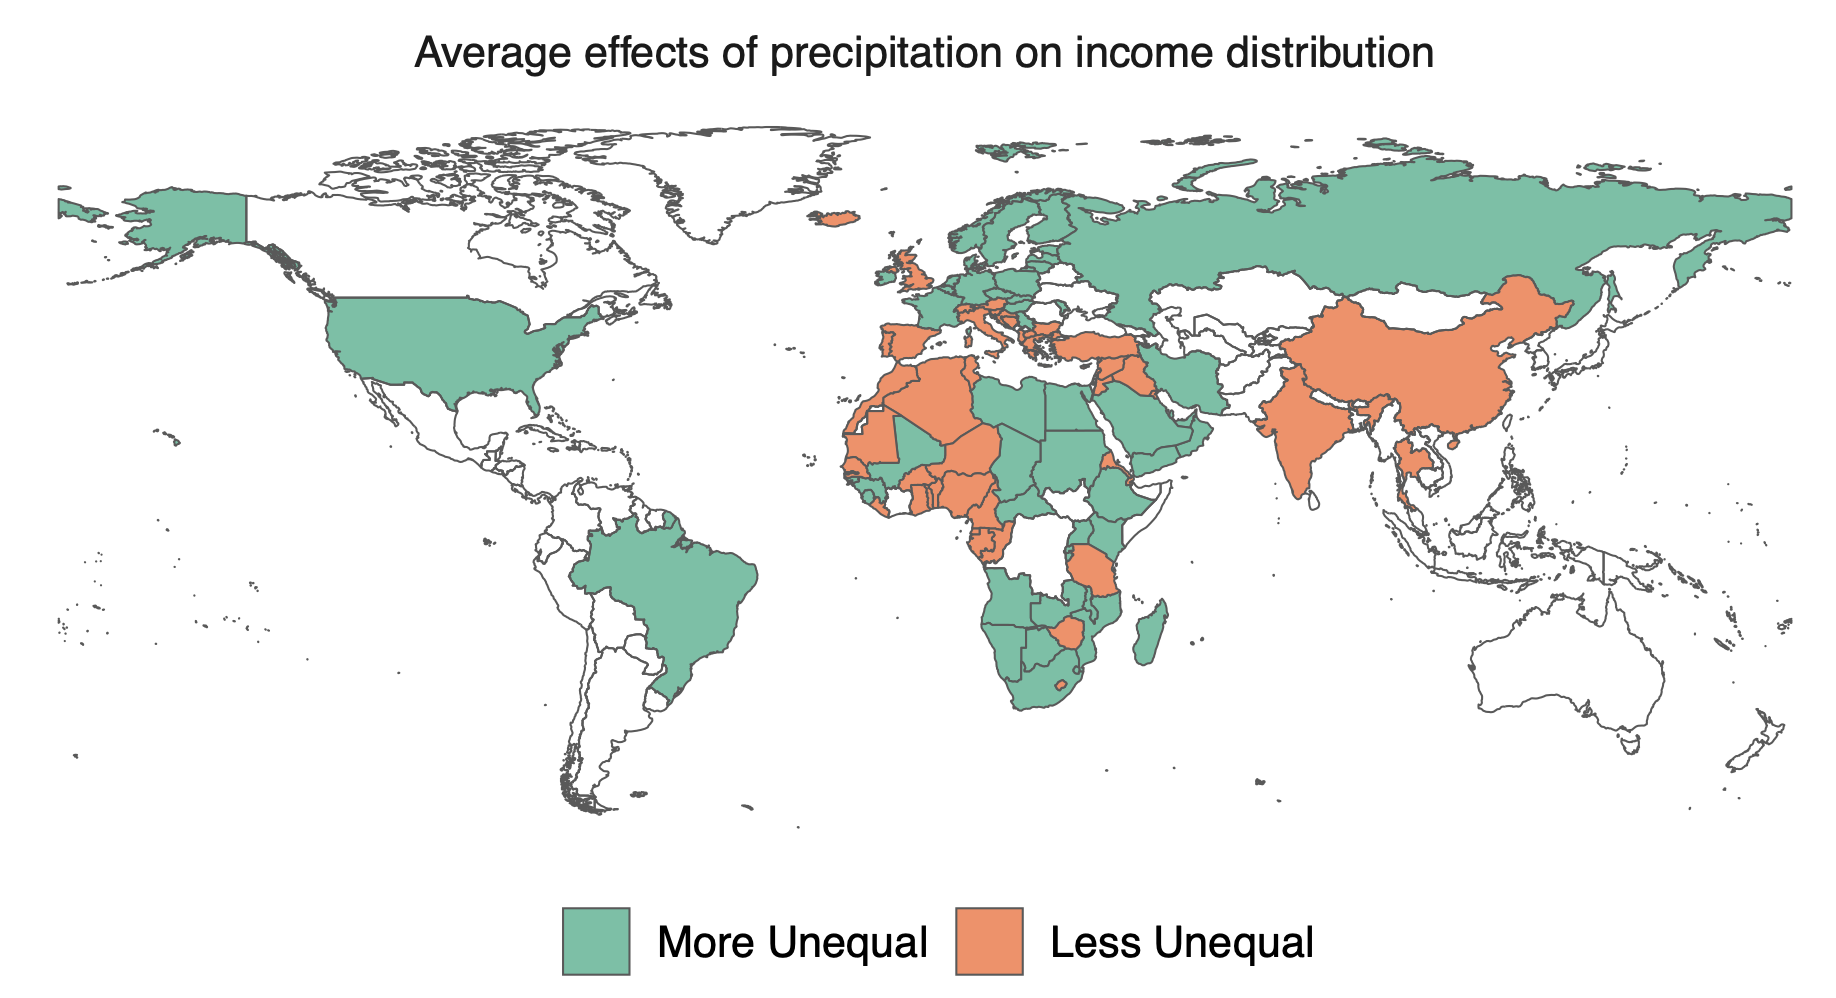 Figure 2 Average projected effects on bottom 50% shares due to precipitation